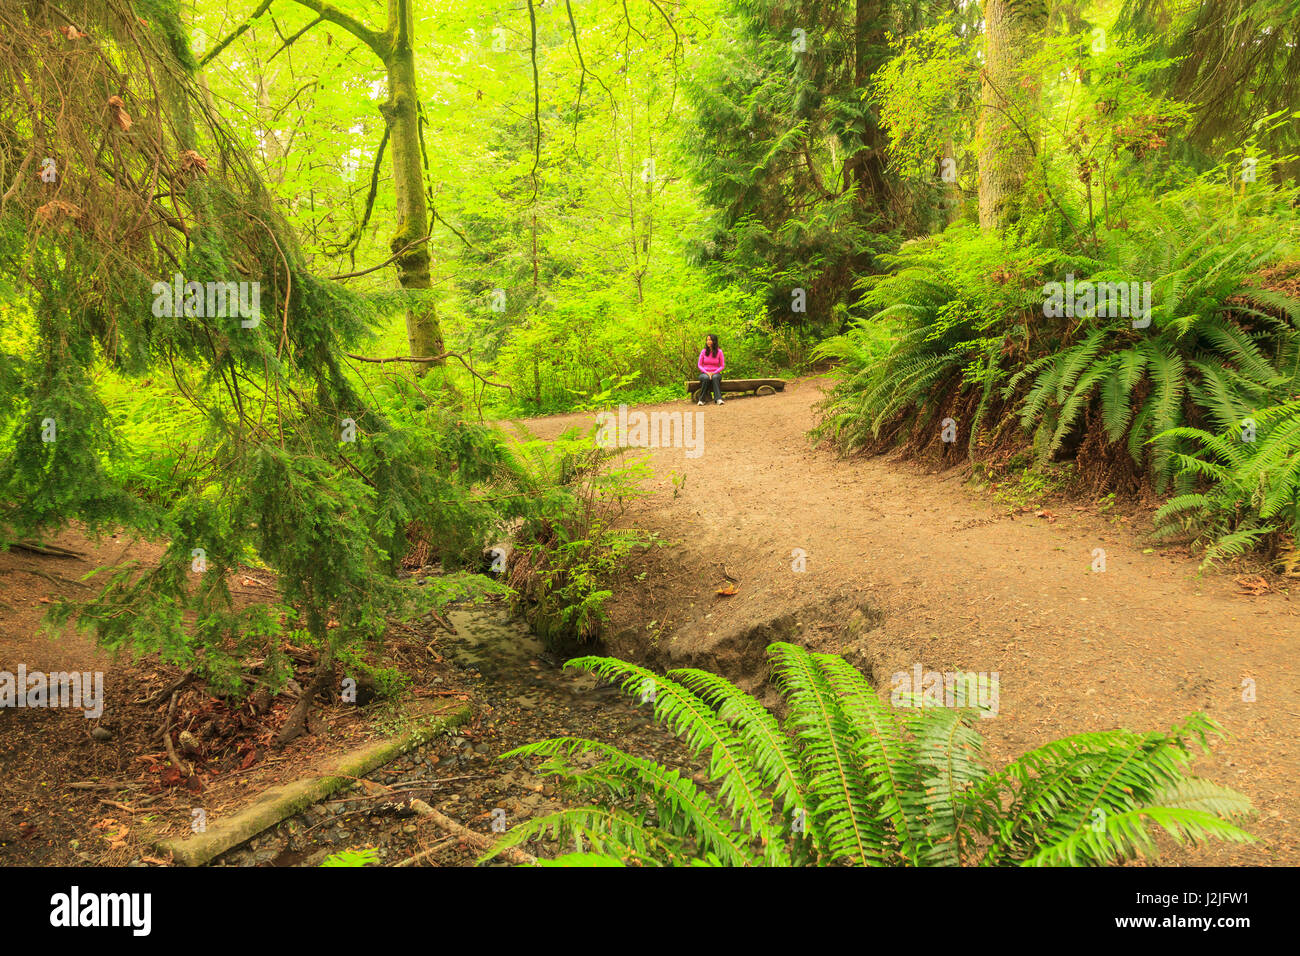 Woman, Schmitz Preserve Park, 53 acre Old Growth Forest in West Seattle, Washington State, USA (MR) Stock Photo